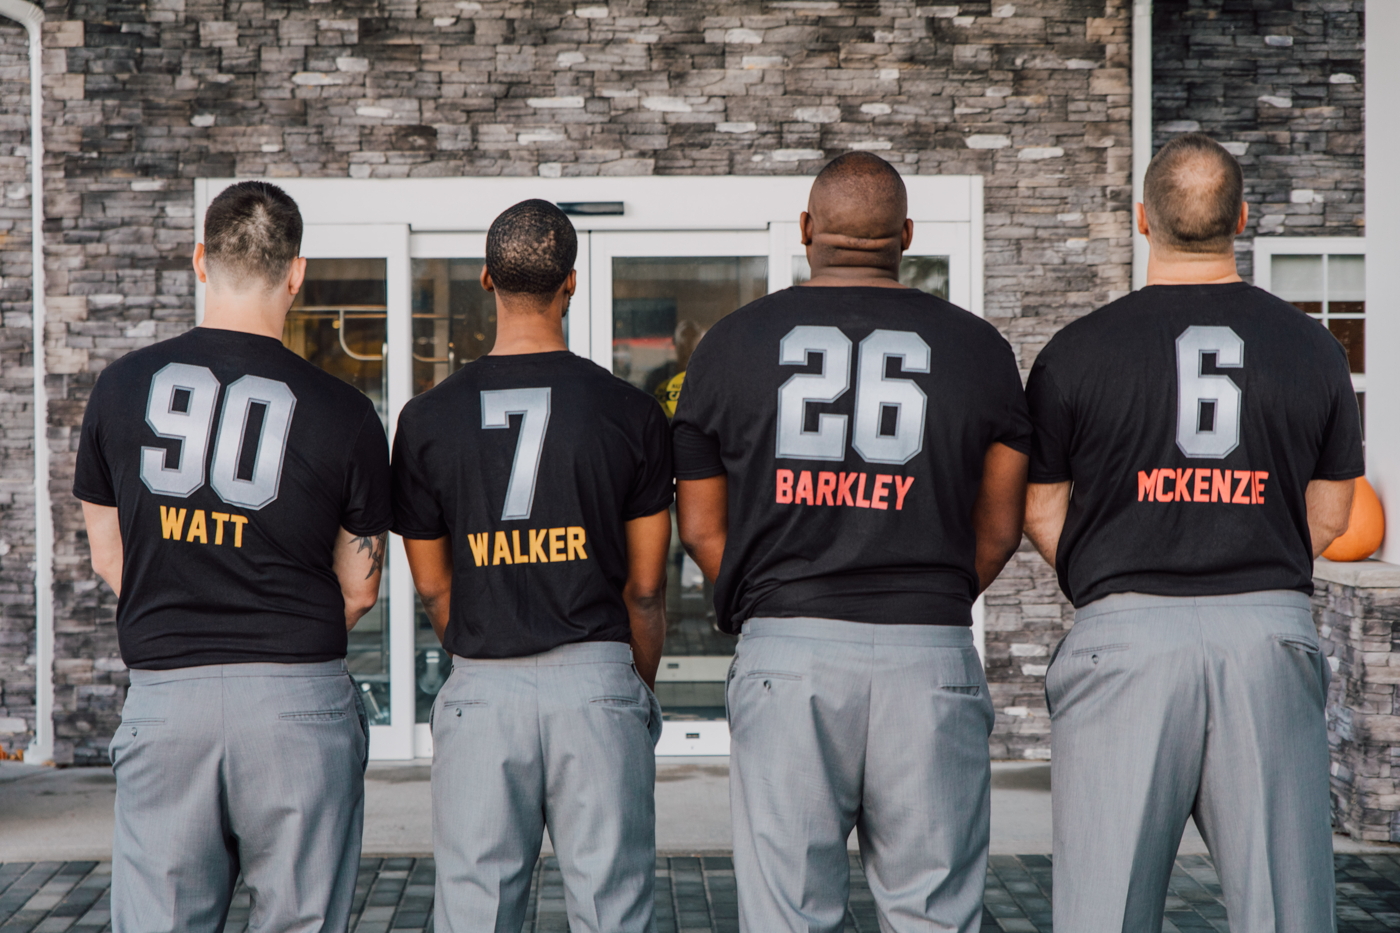  Groomsmen lined up wearing football jersey shirts with their names on the back 